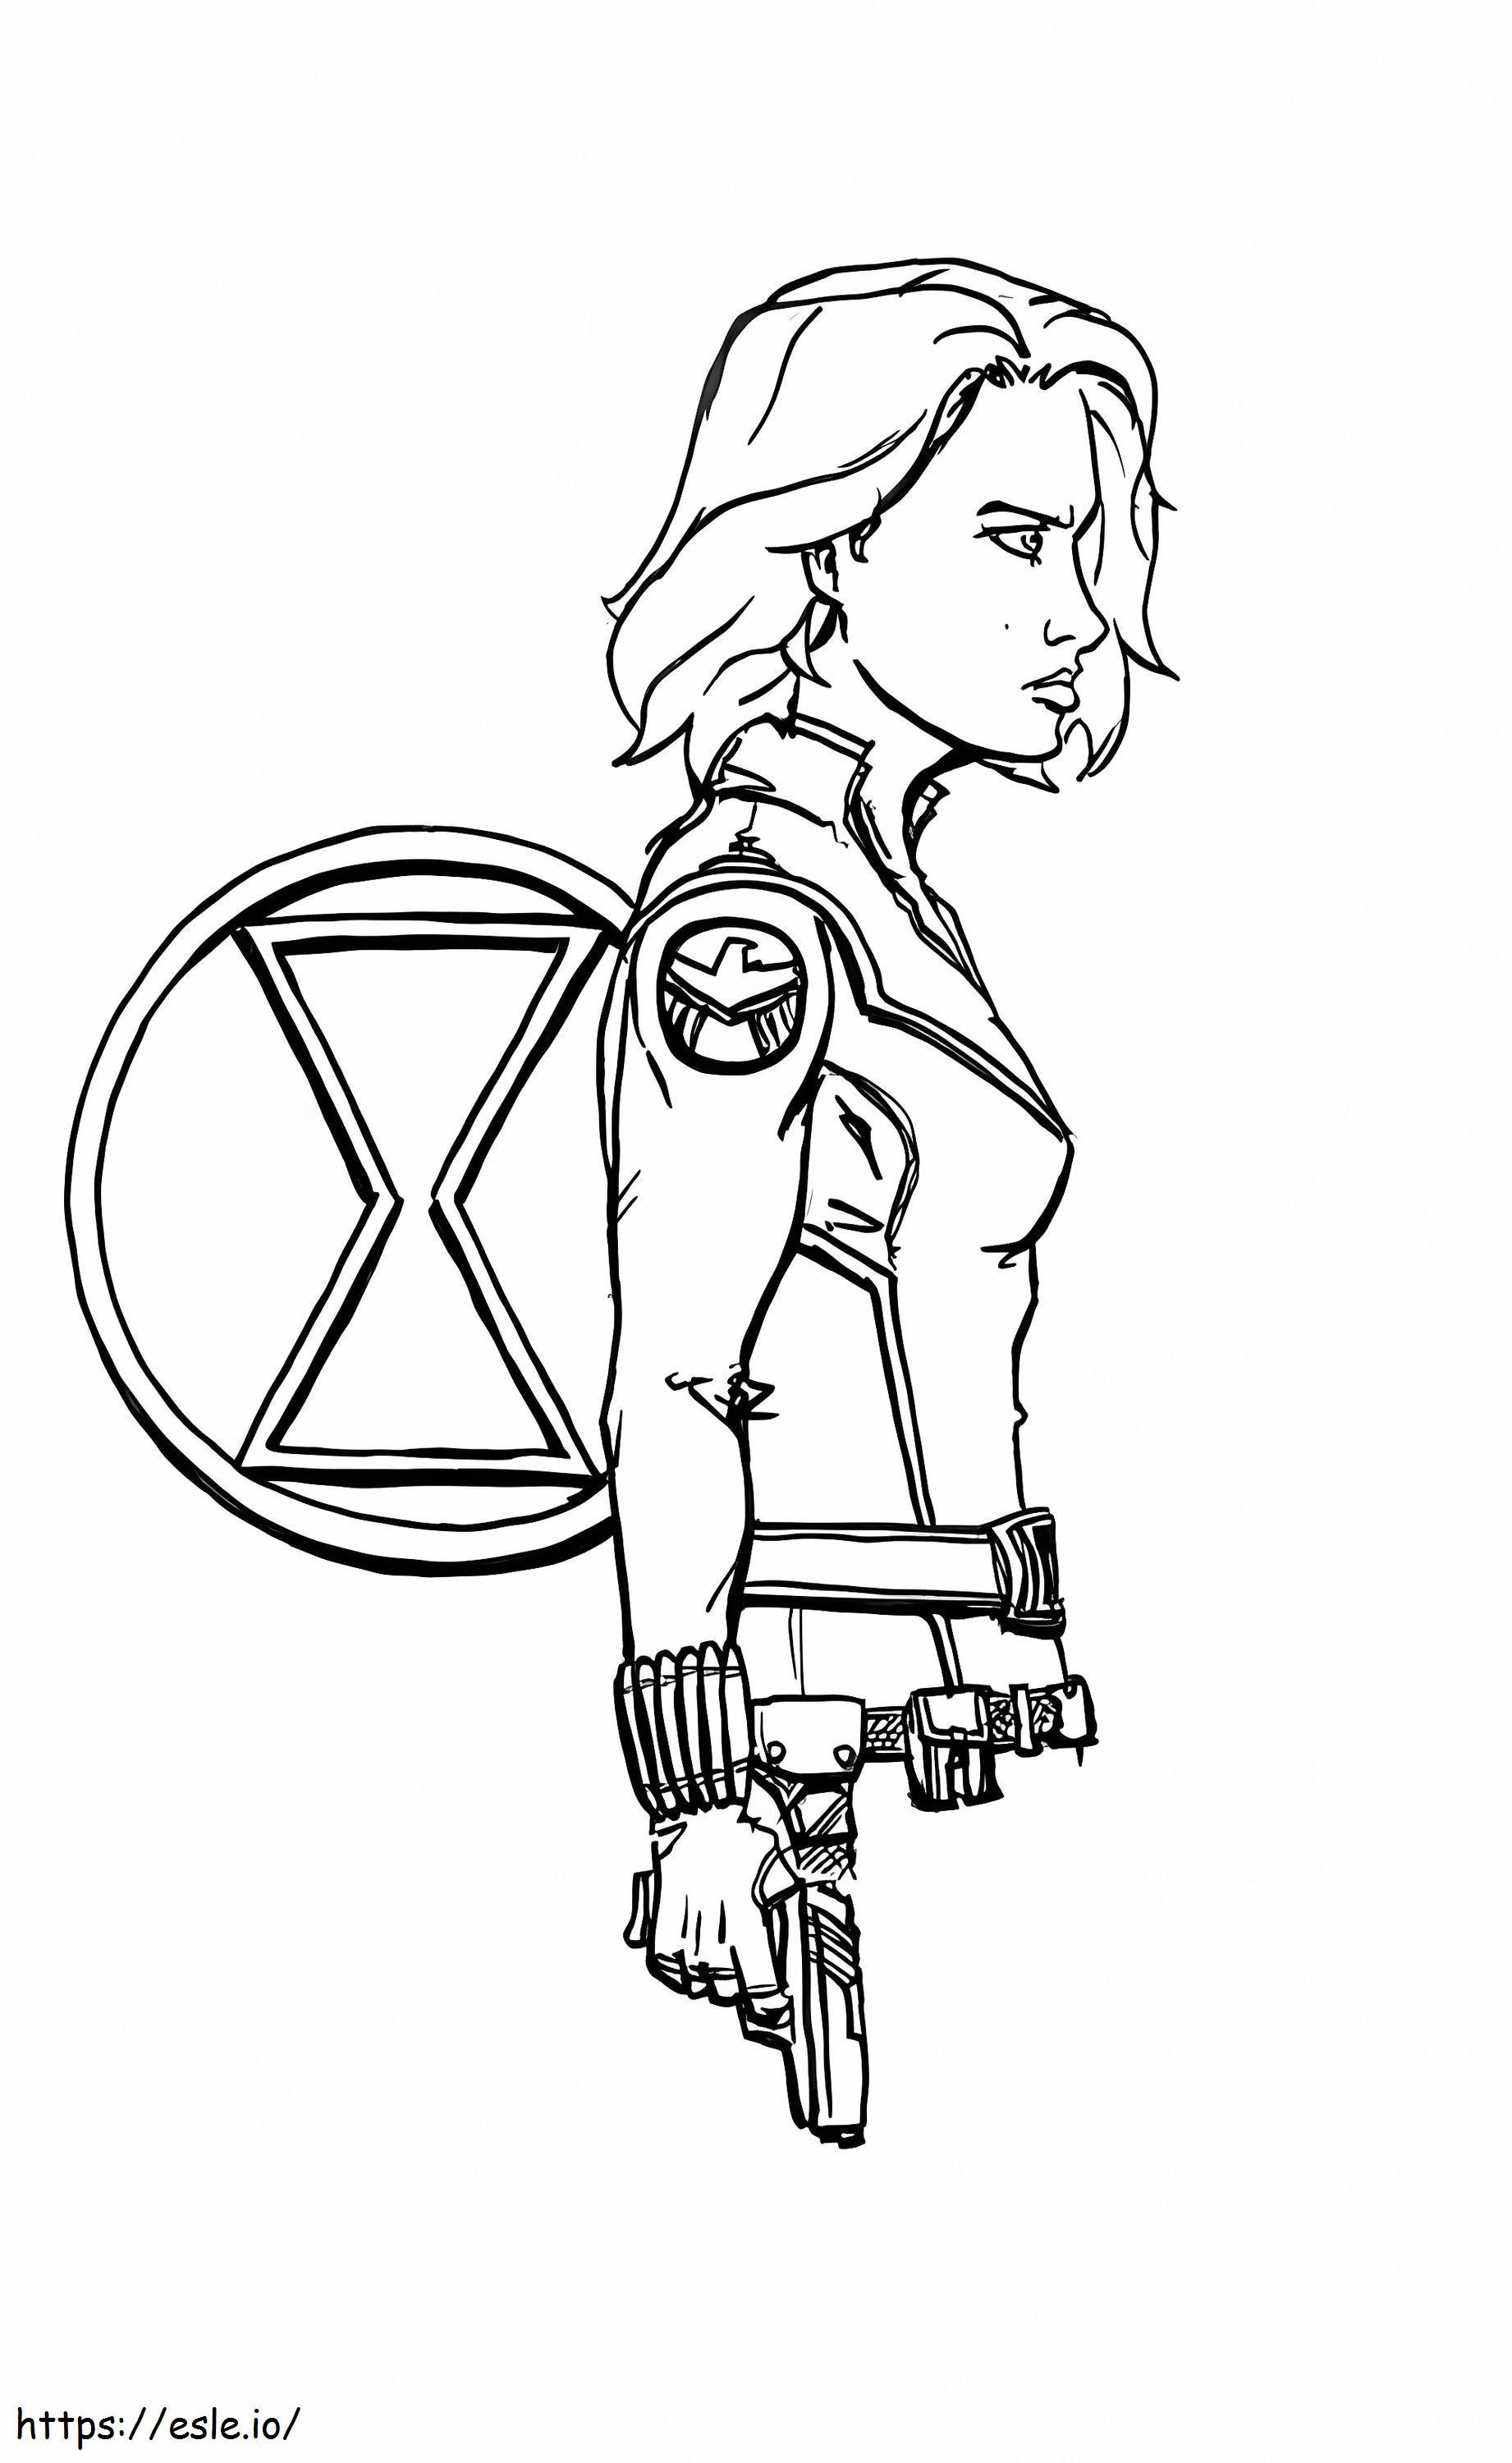 Black Widow 16 coloring page